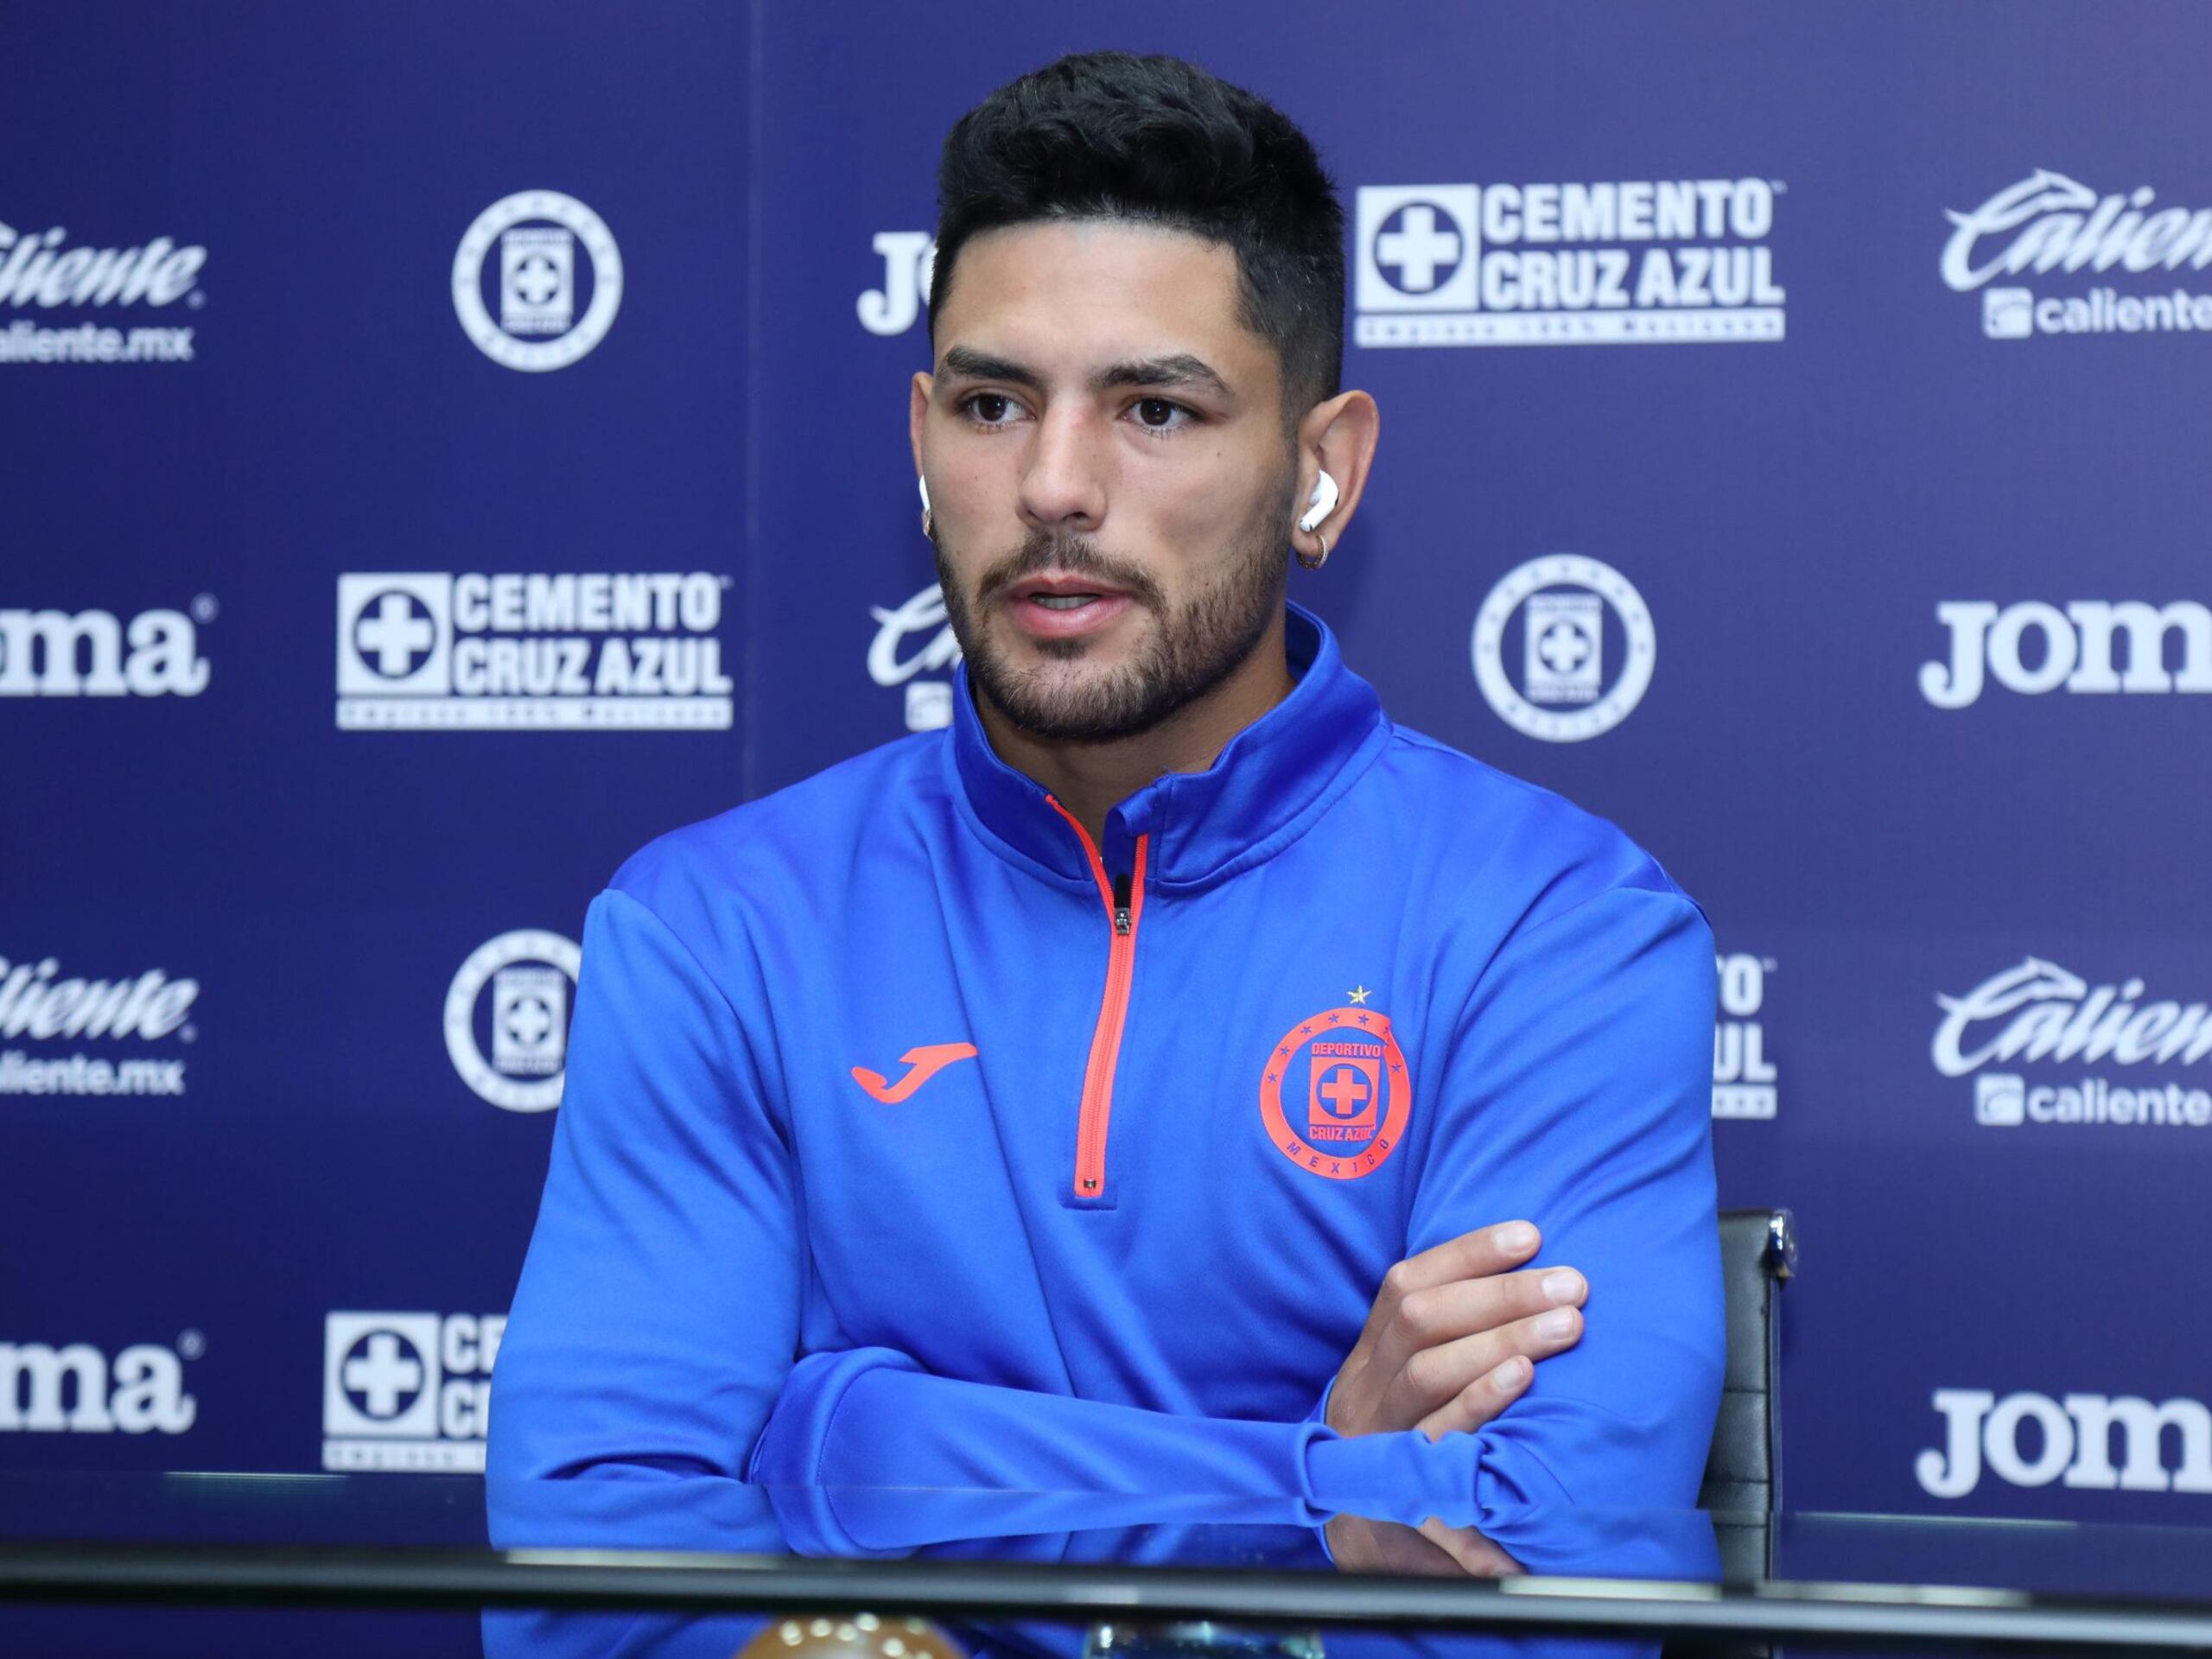 Cruz Azul parted ways with Lucas Passerini in order to have a new addition and he’ll be Mexican